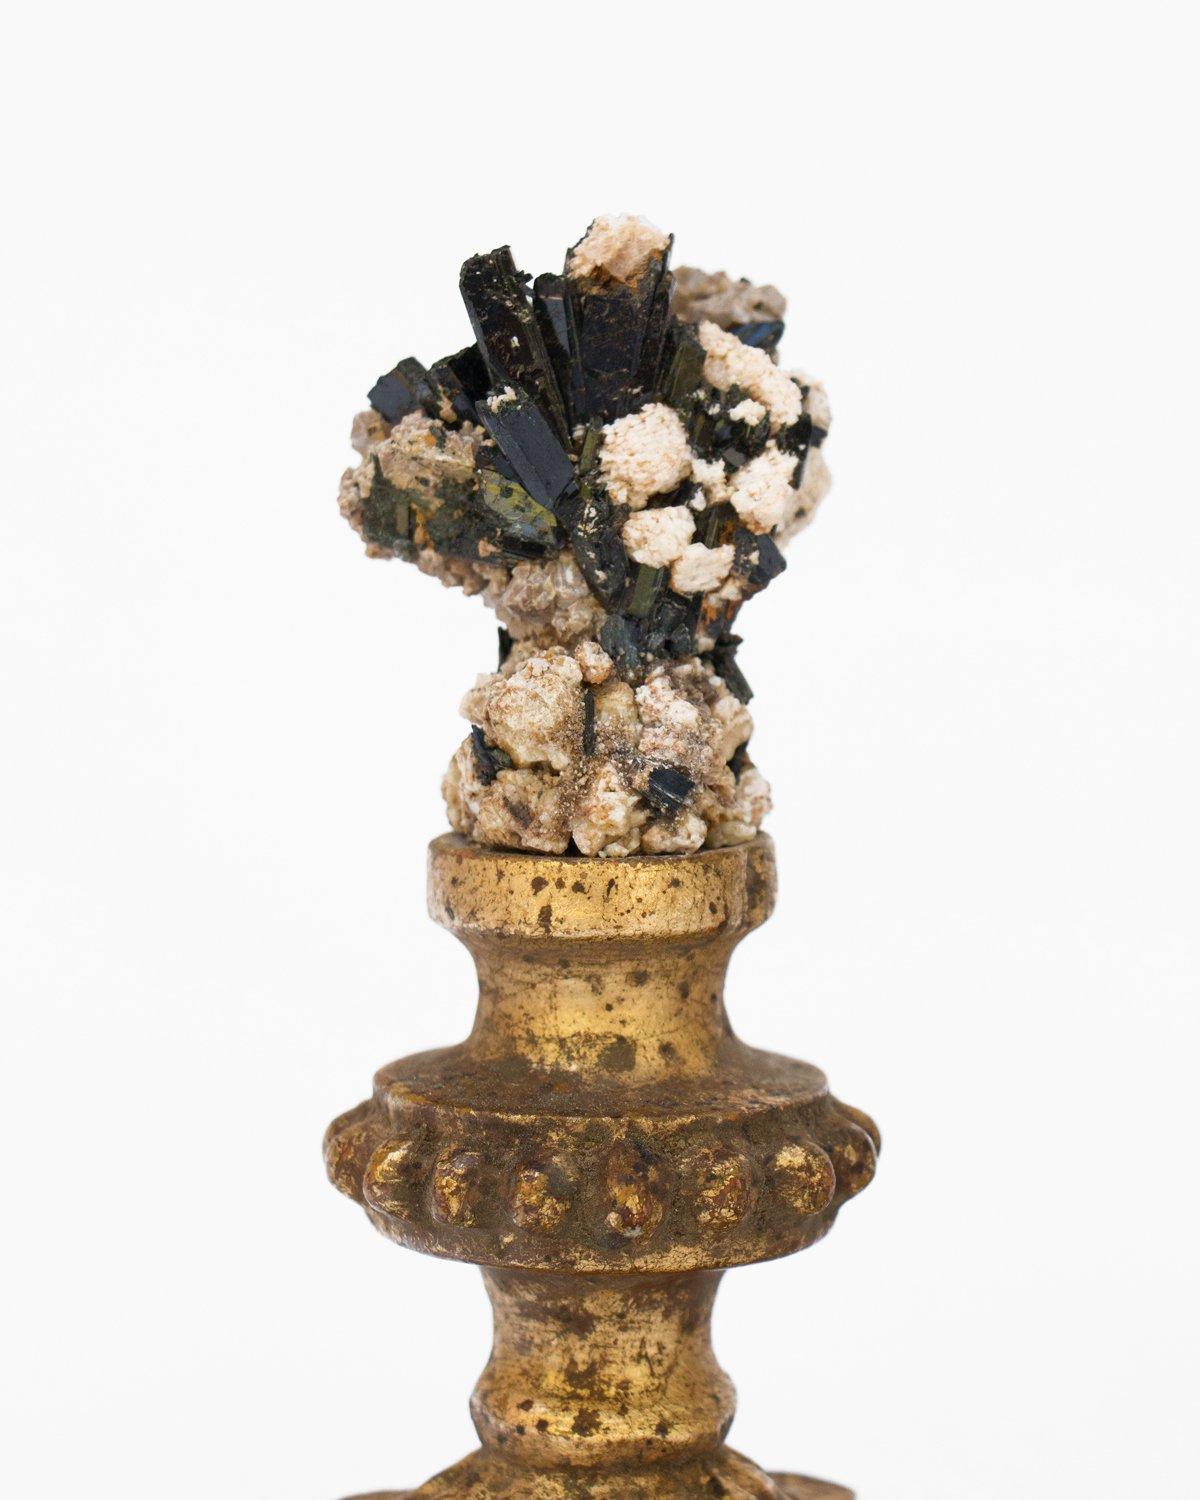 A pair of 18th century Italian candlestick fragments decorated with tourmaline in matrix.

The pair of 18th century Italian gold leaf candlestick fragments are originally from a church in Florence. They are combined with natural-forming toumaline.